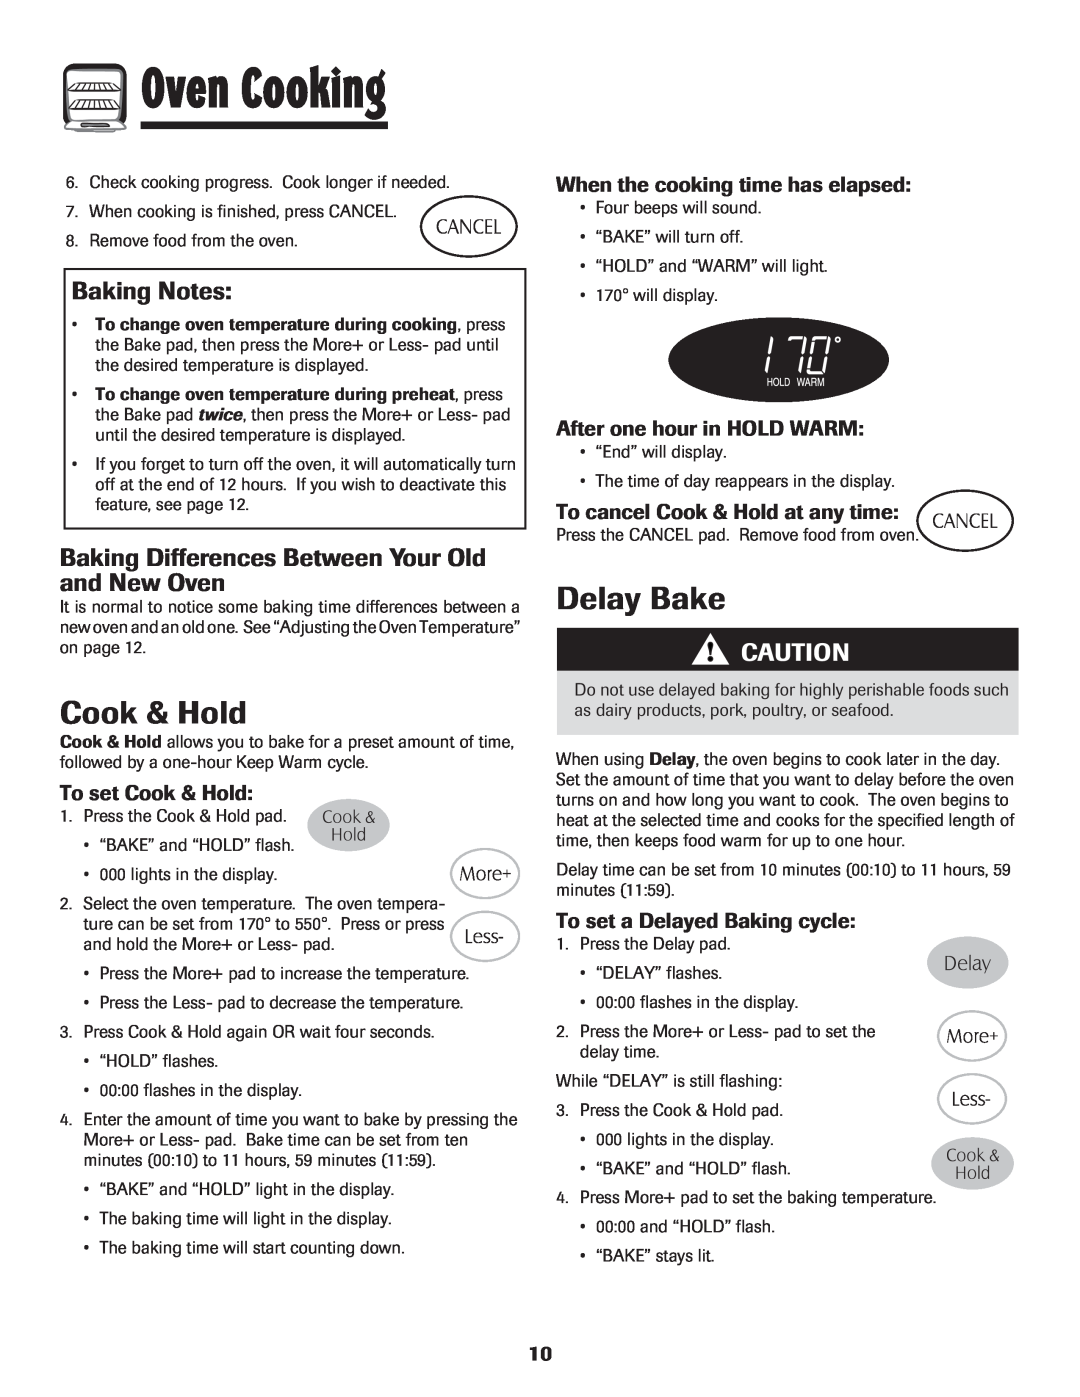 Maytag MER5552BAW Cook & Hold, Delay Bake, Baking Notes, Baking Differences Between Your Old and New Oven, Oven Cooking 